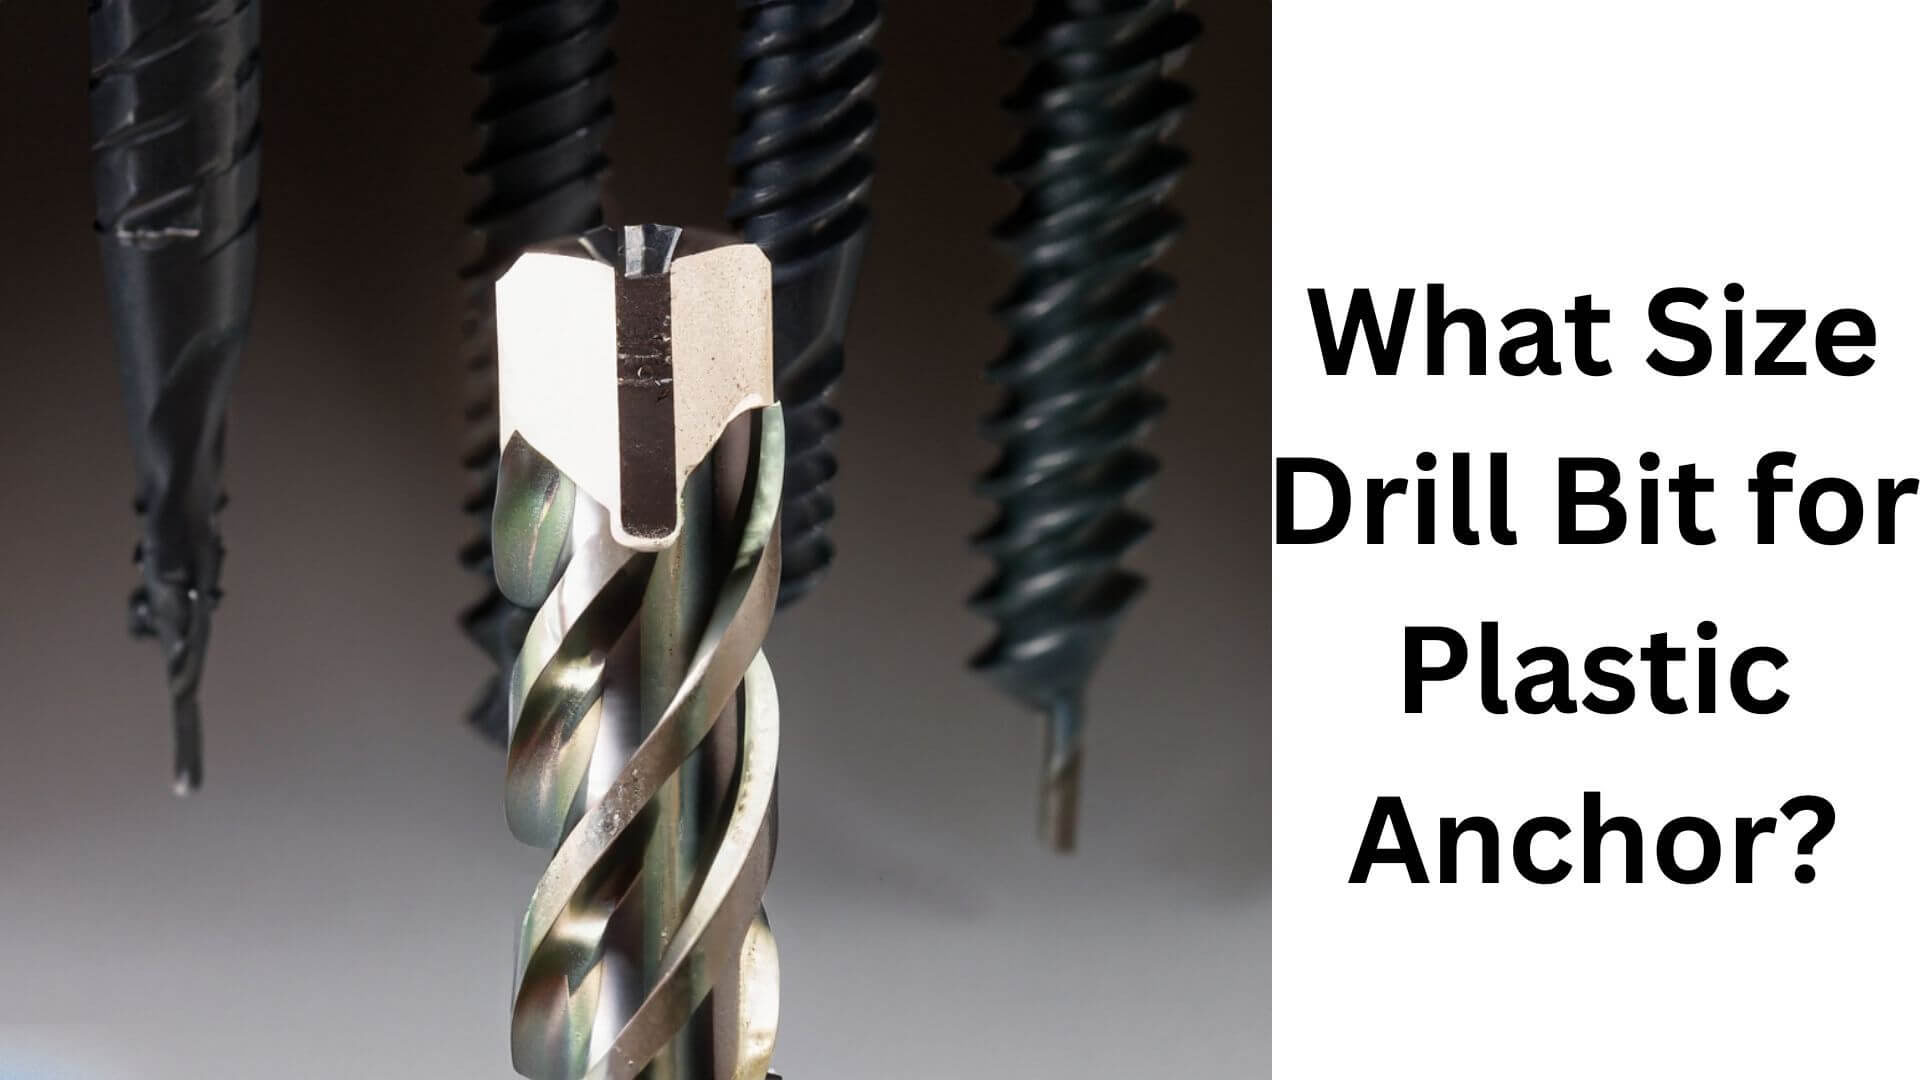 What Size Drill Bit for Plastic Anchor?